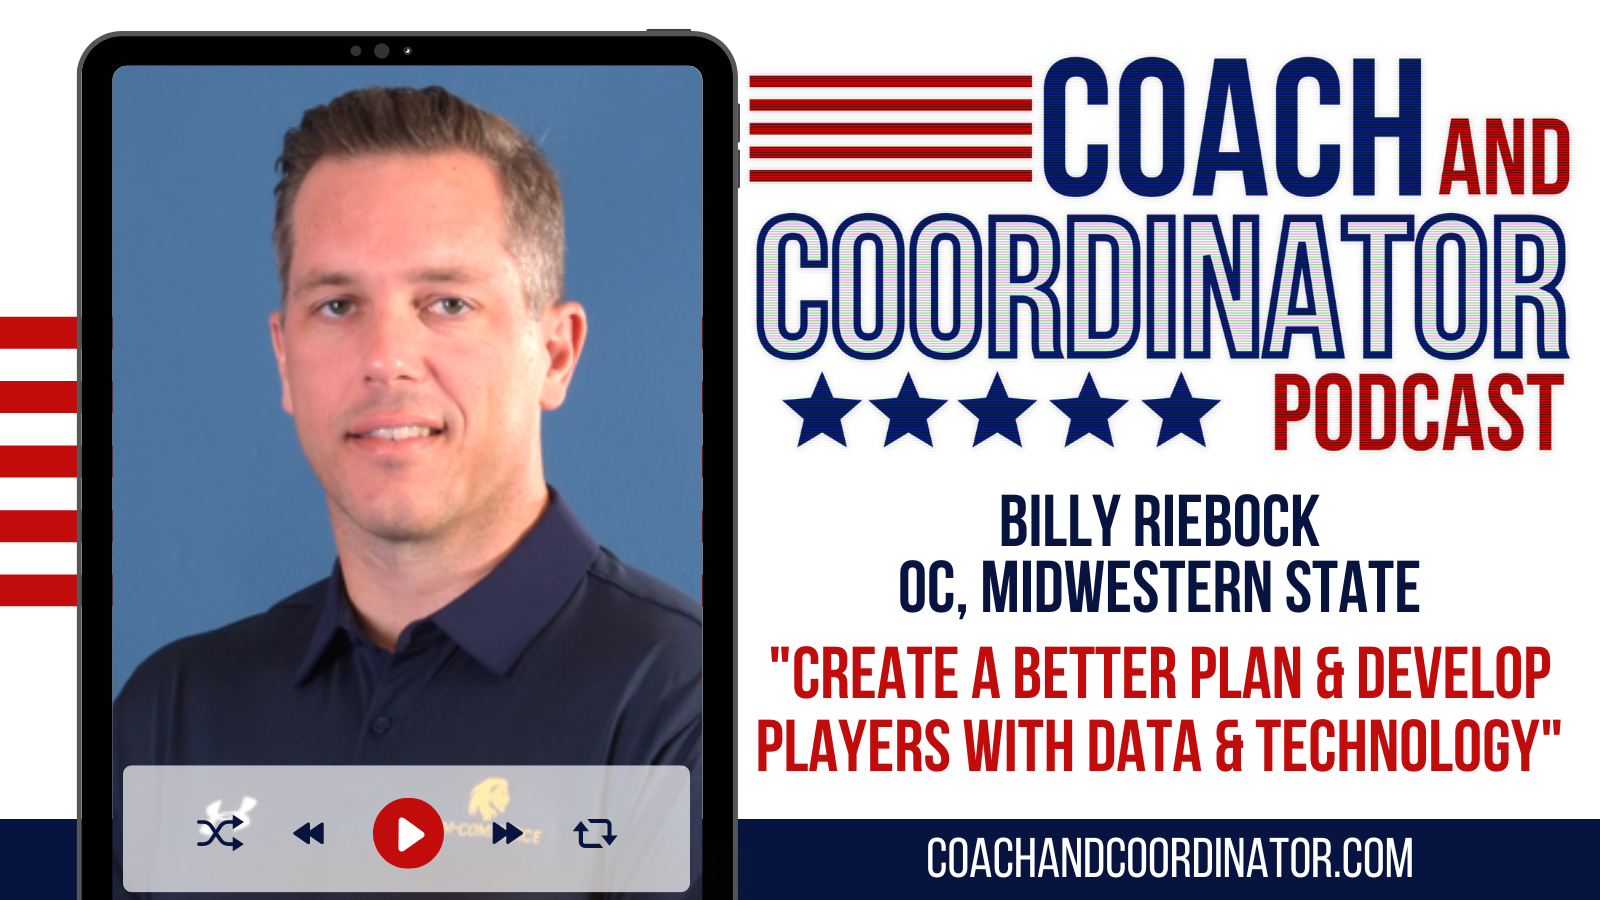 Billy Riebock, Offensive Coordinator, Midwestern State